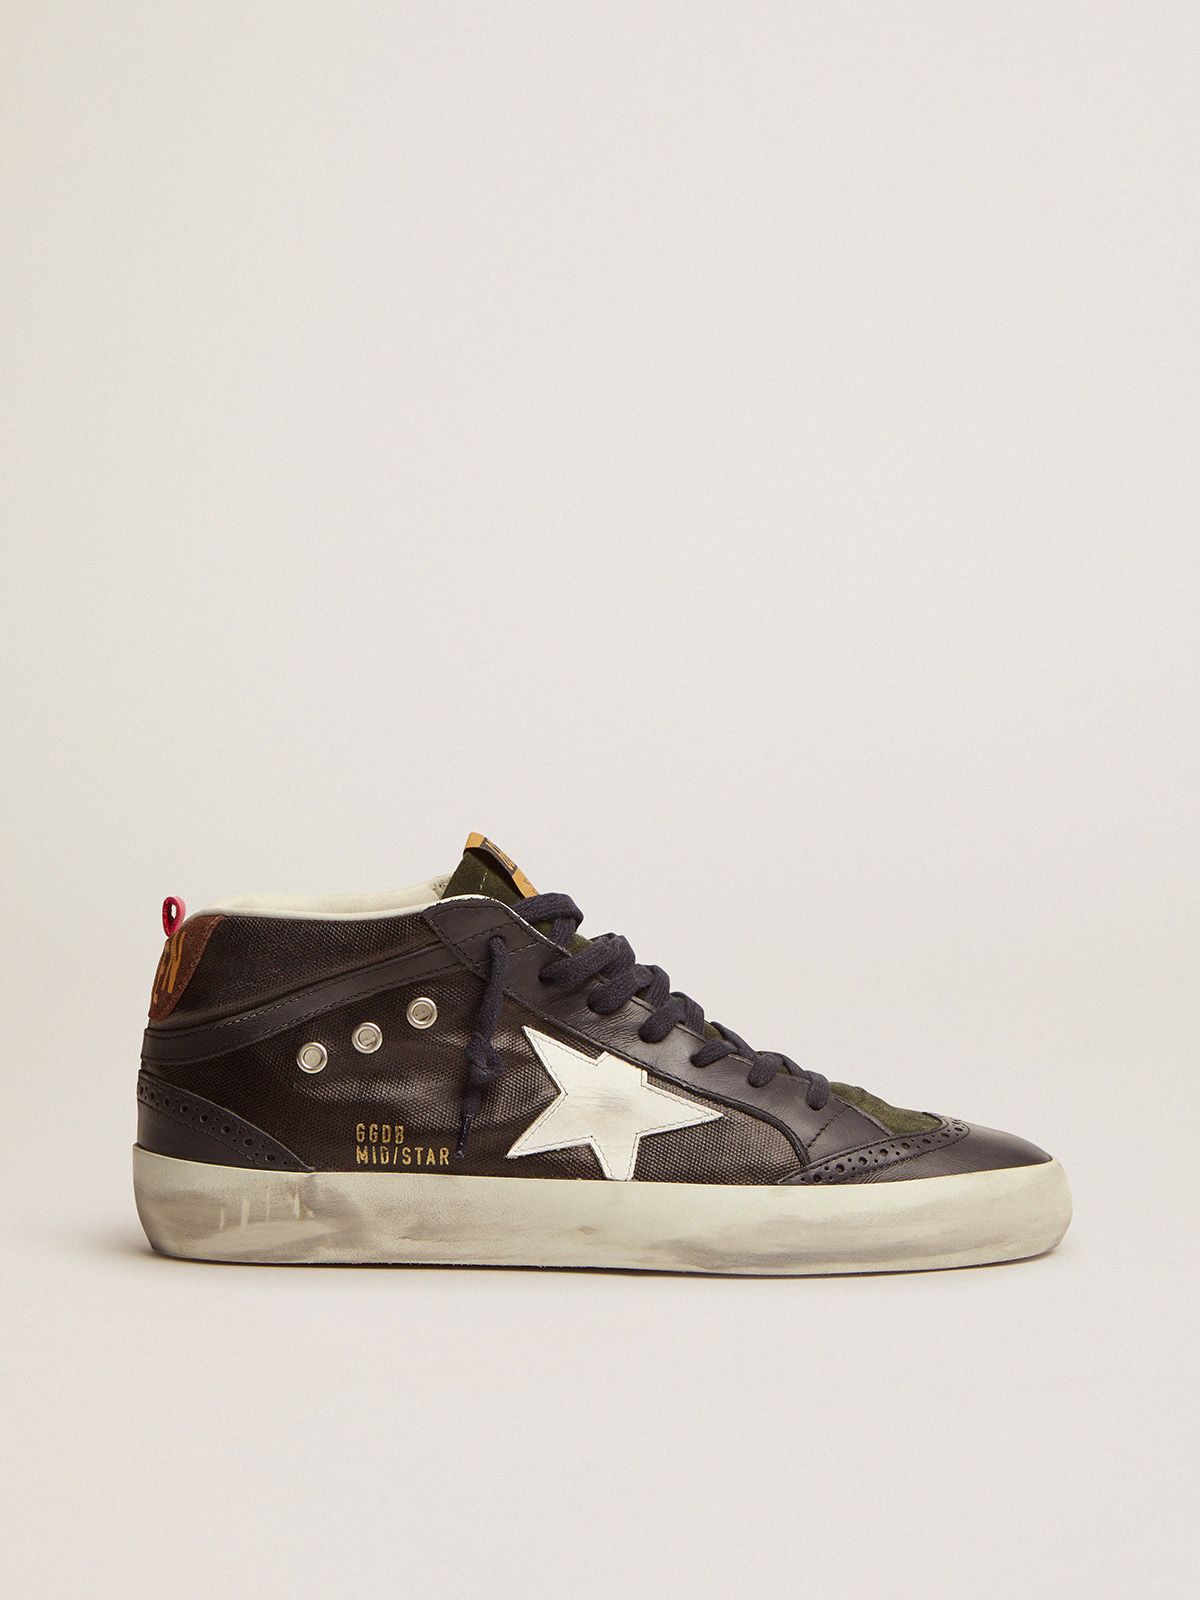 Golden Goose Sconto Uomo Mid Star sneakers in dark blue canvas with white leather star